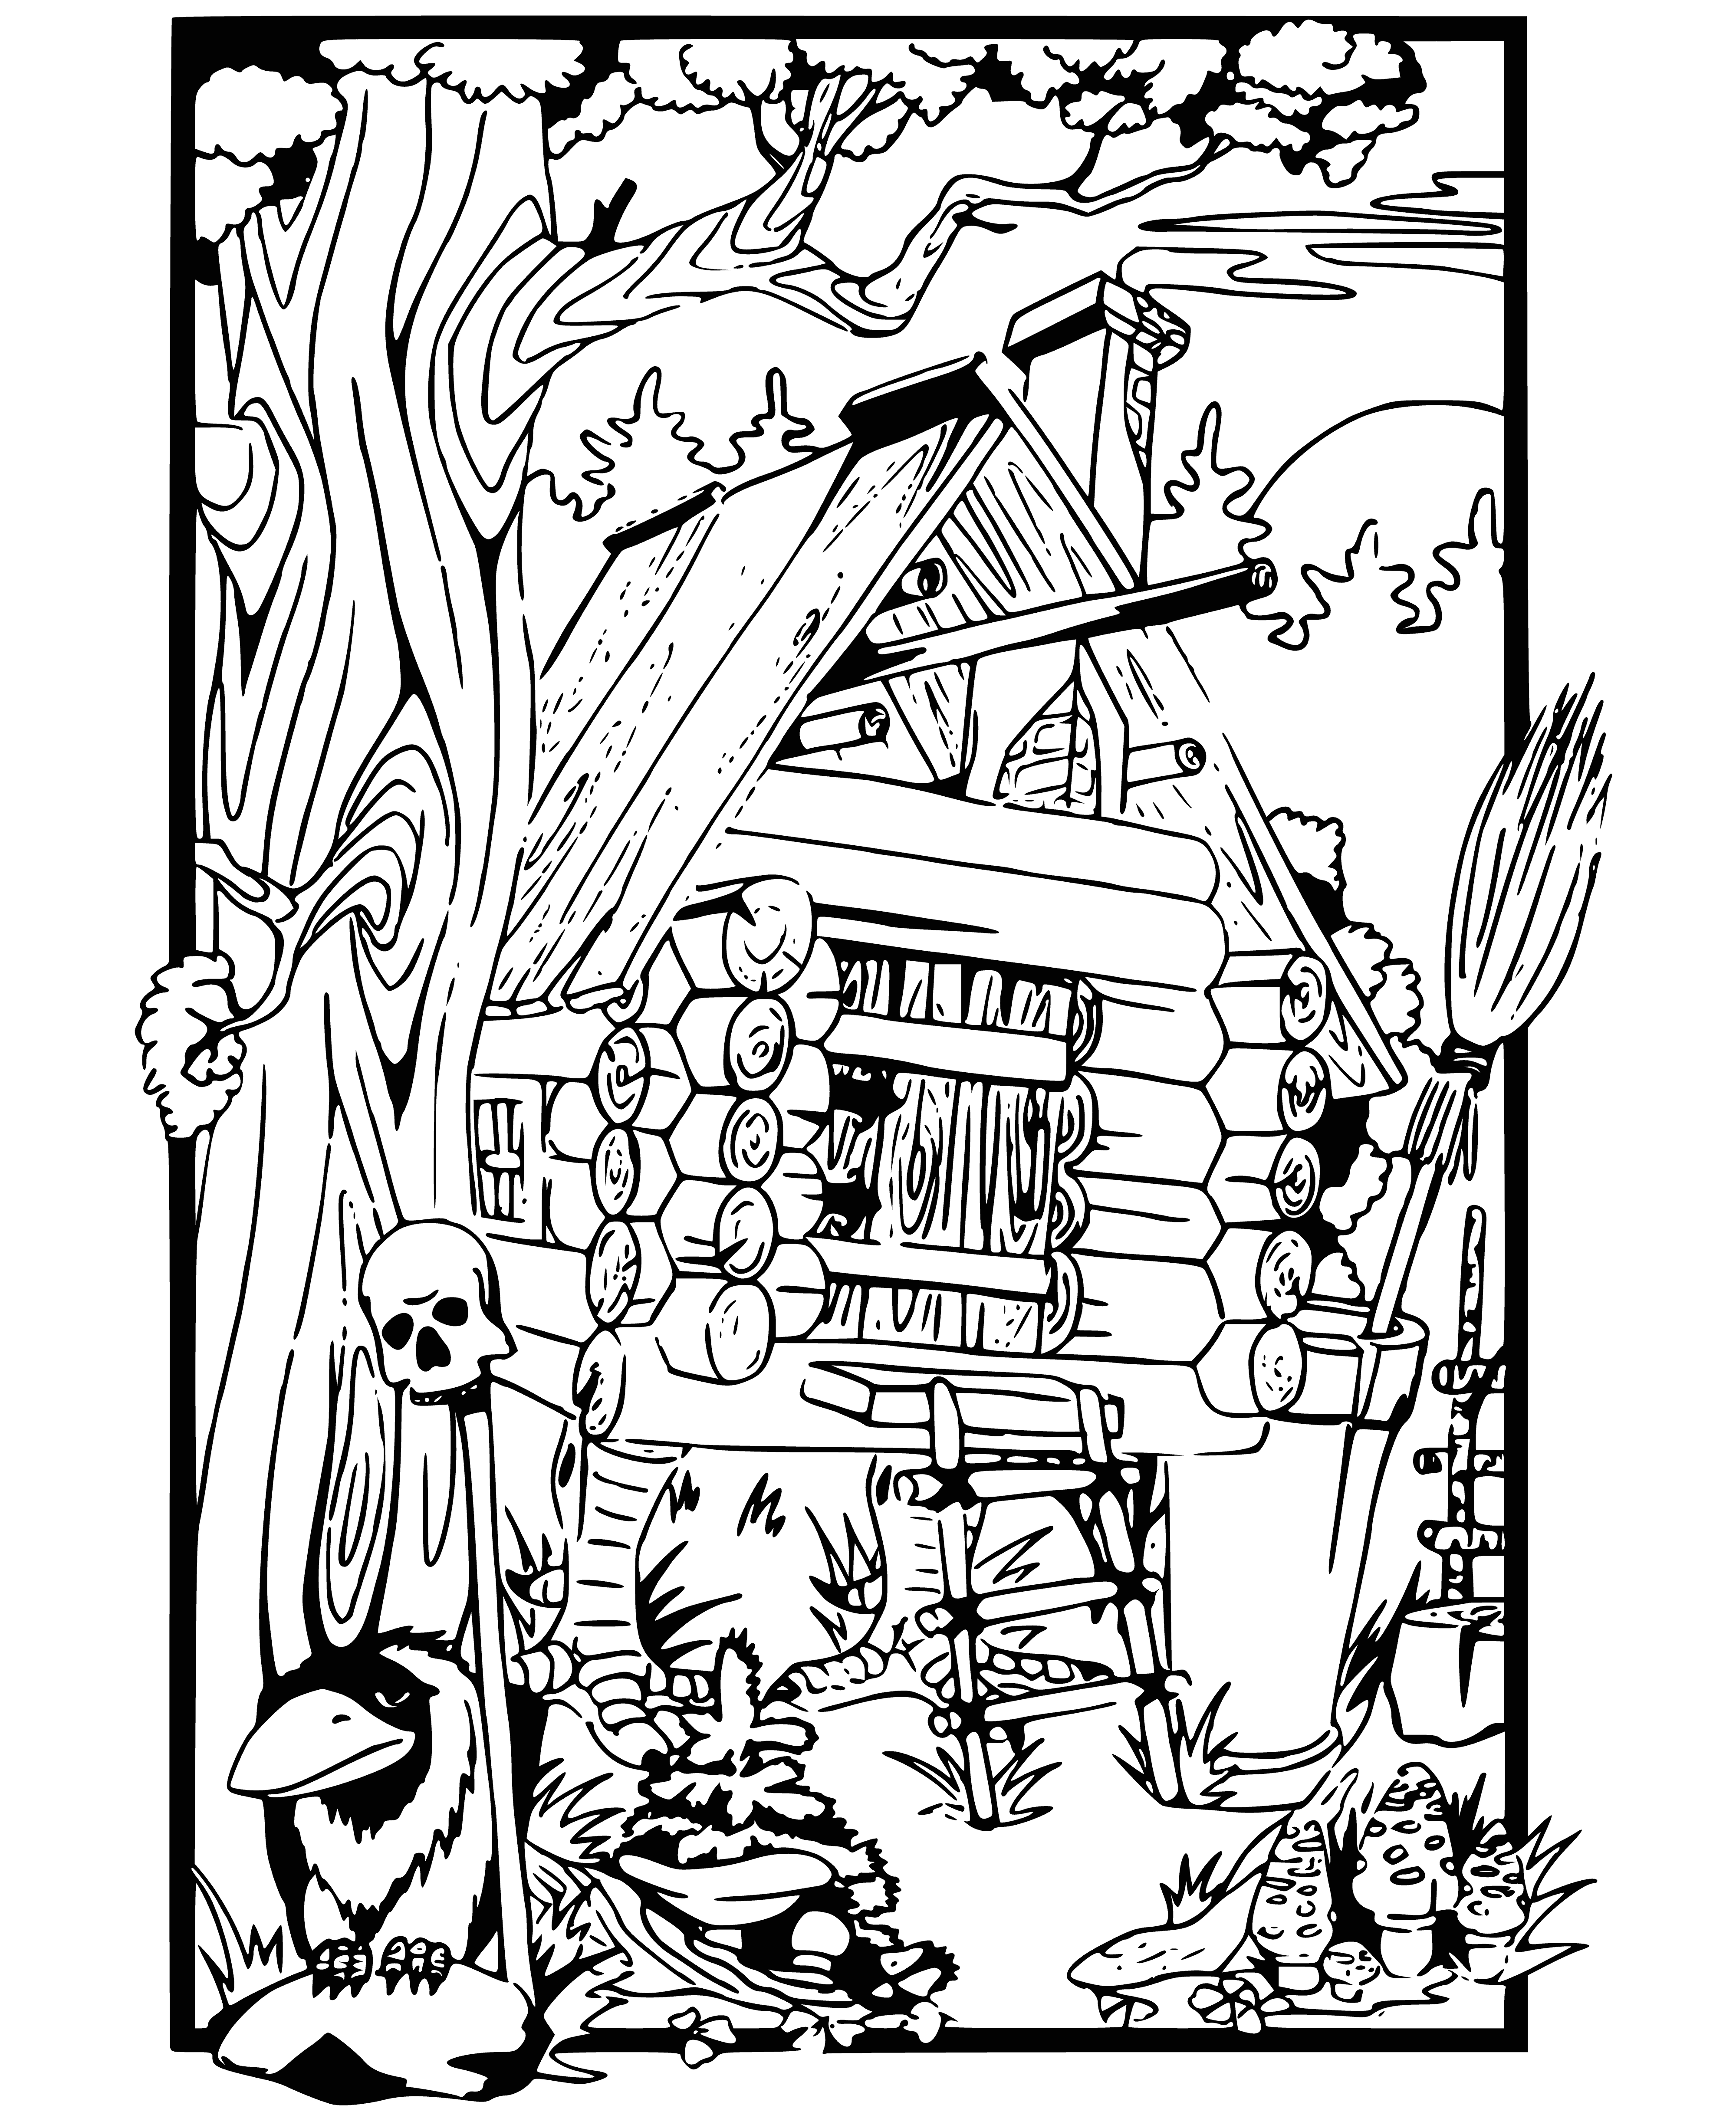 coloring page: Color a hut on chicken legs surrounded by a fence with a tree nearby. Path leading to it. #coloringpage